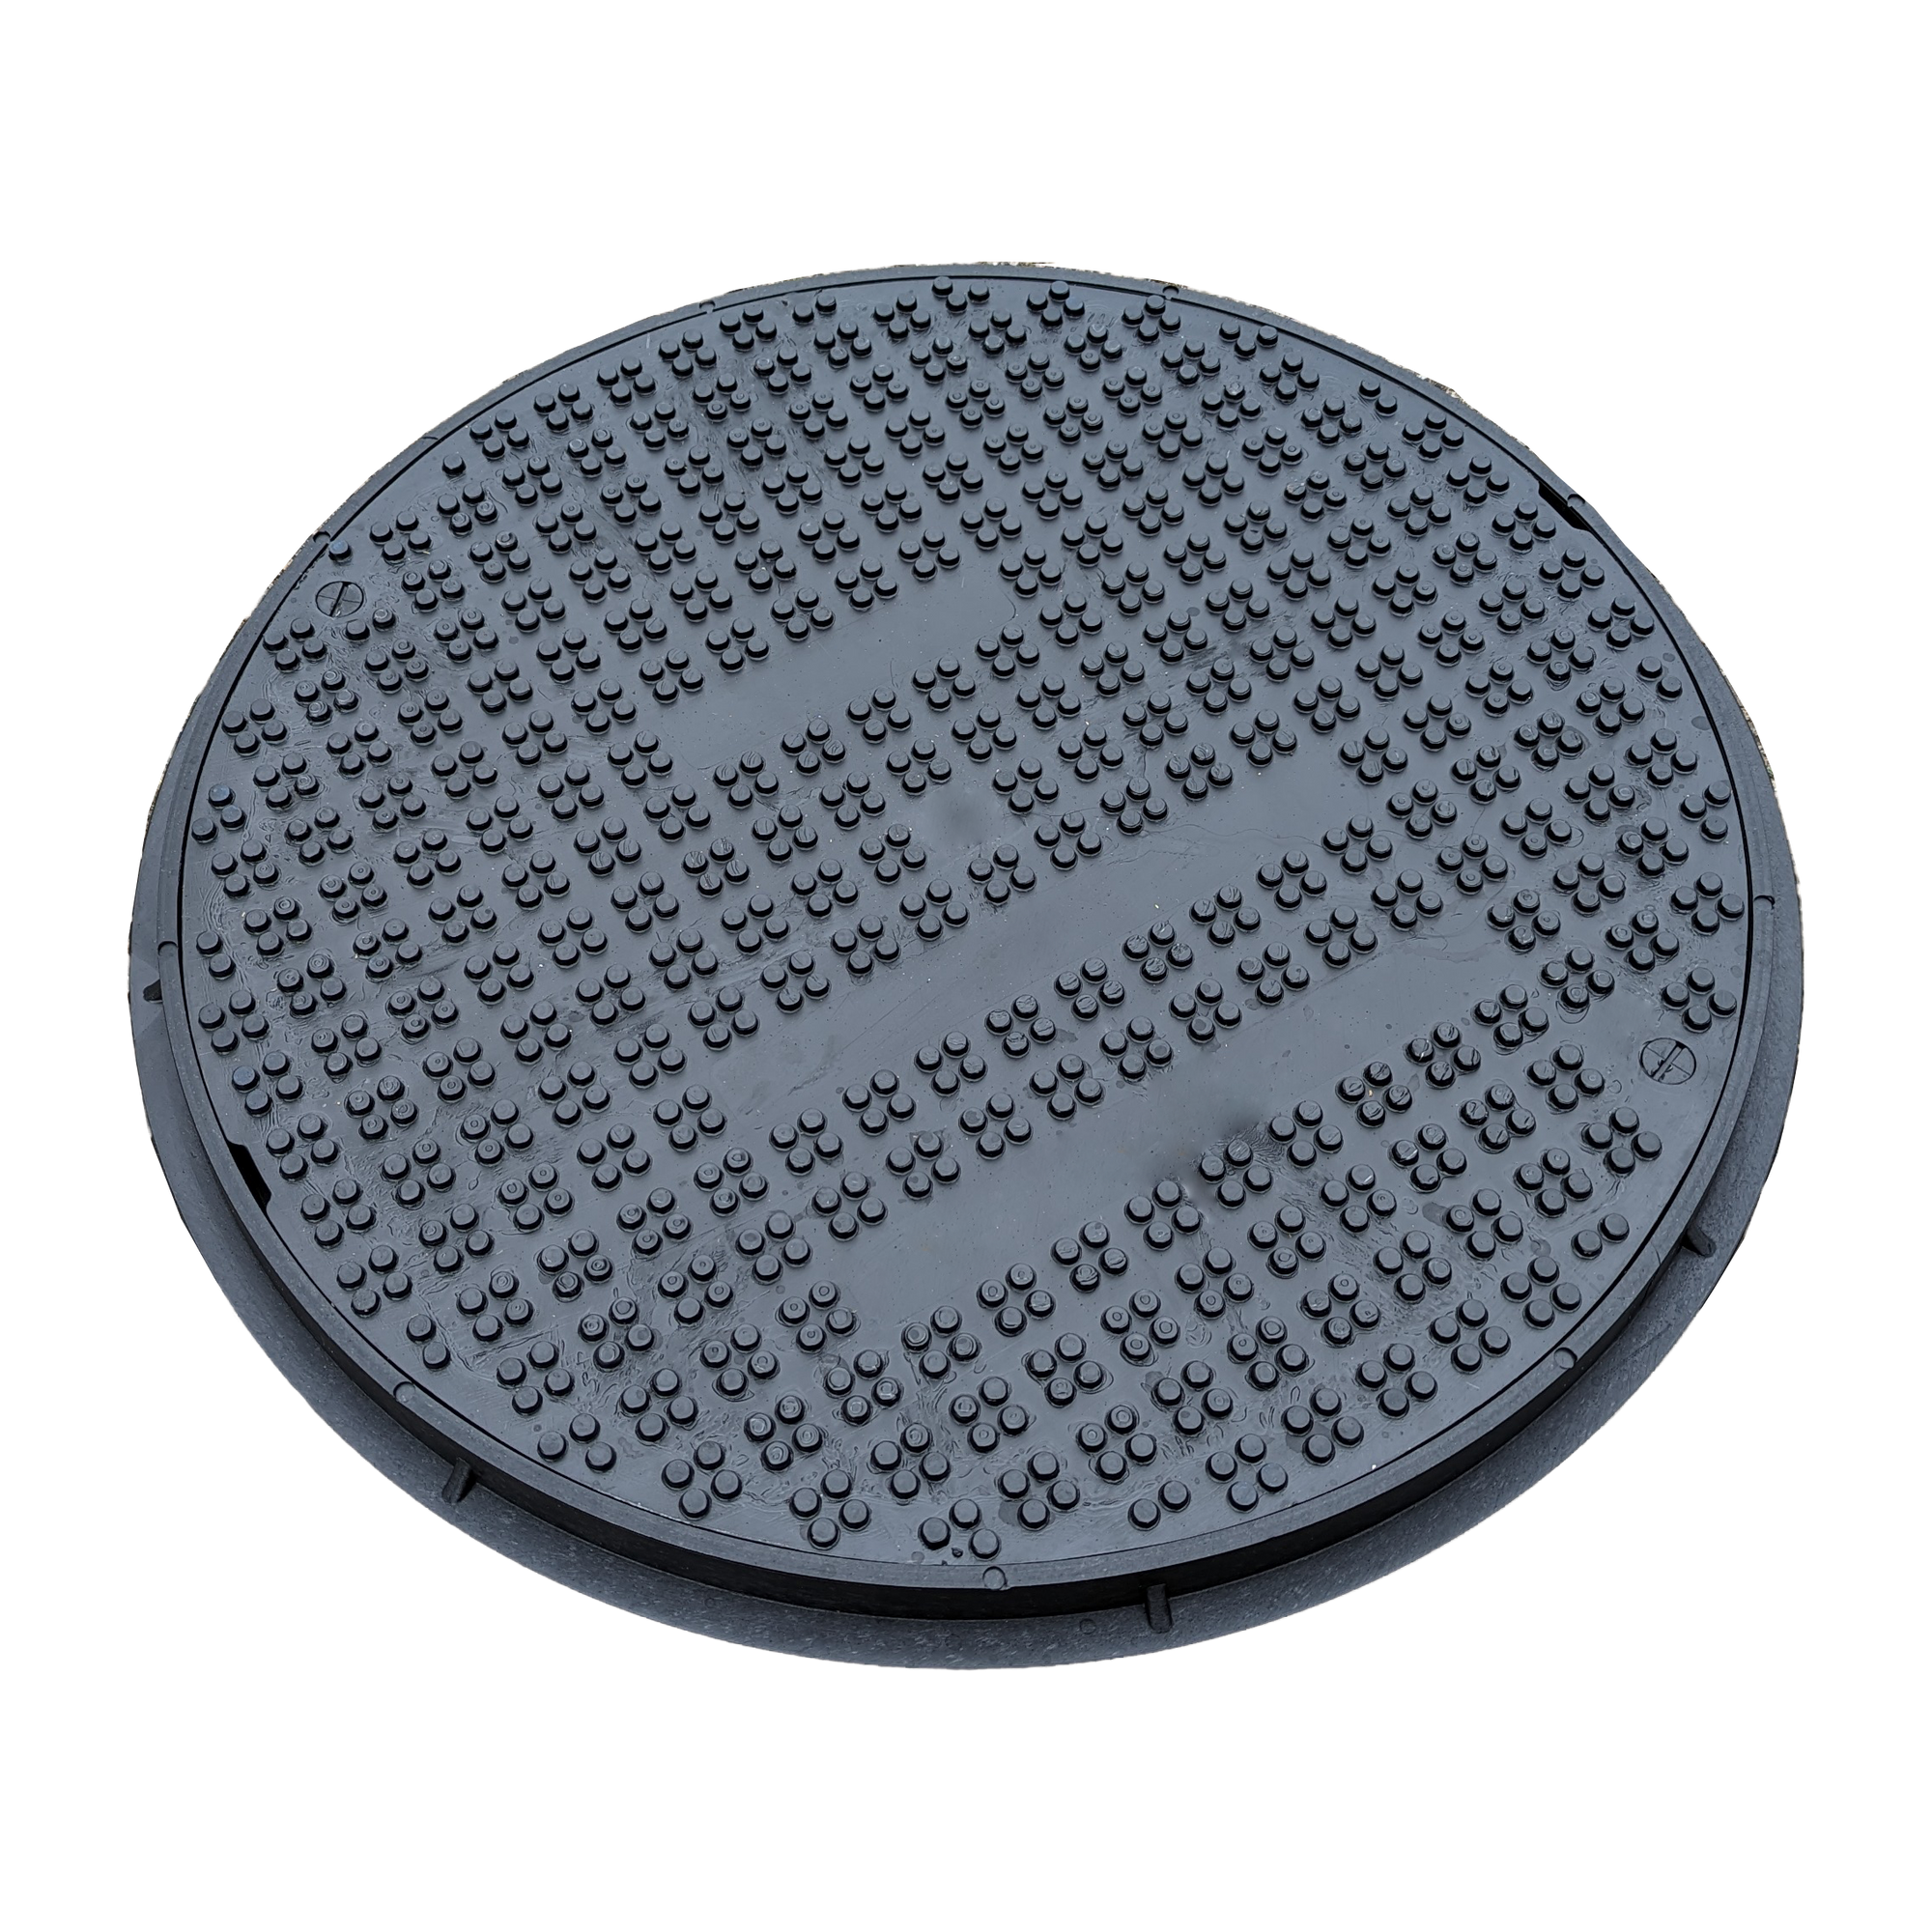 IBRAN-R50 round manhole cover for inspection chambers of 50cm diameter